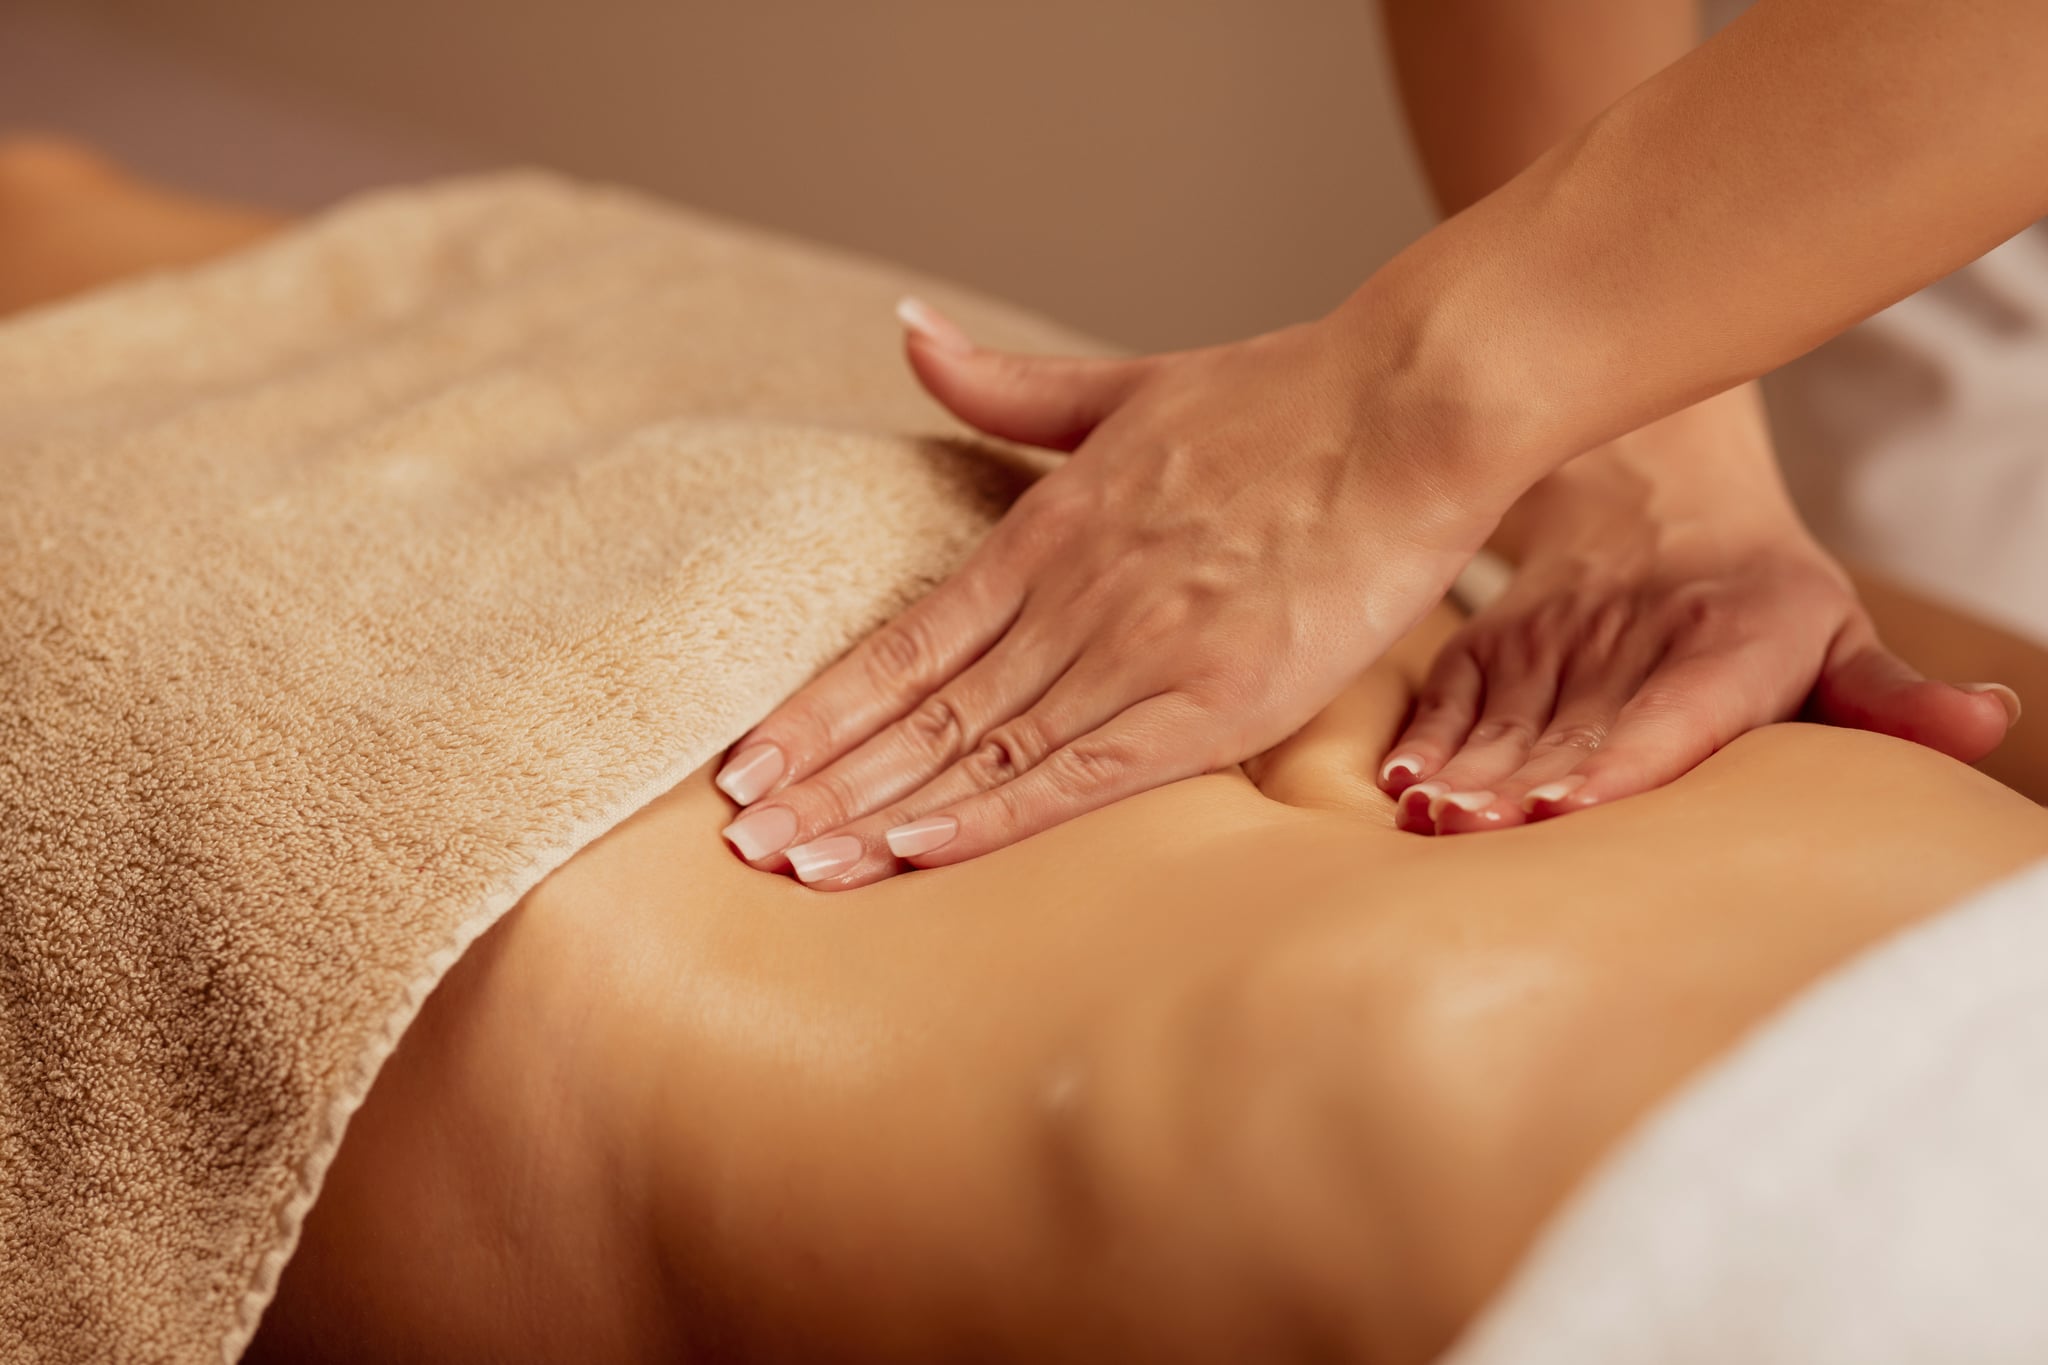 Belly massage. Anti cellulite massage.  Massage Therapist doing healing massage with rolling pin or battledore . Woman enjoying in relaxing massaging at health spa treatment.